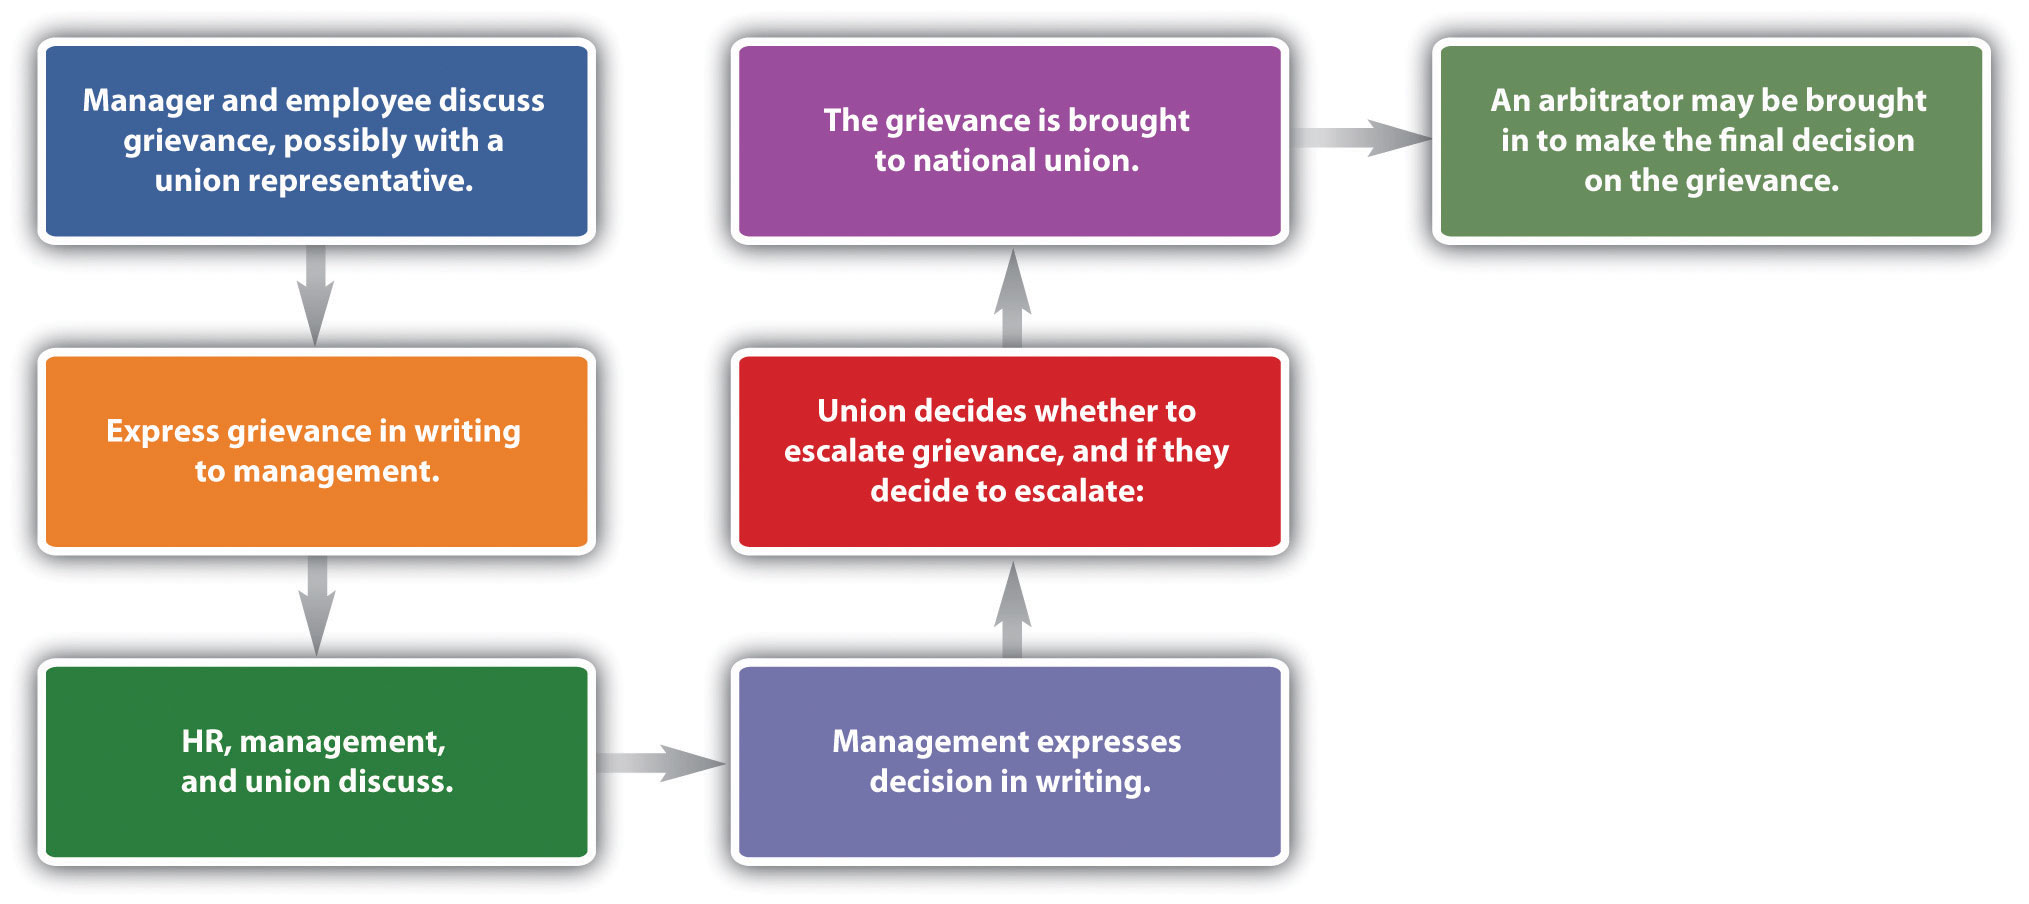 Sample Grievance Process: Manager and employee discuss grievance, possibly with a union representative; express grievance in writing to management; HR, management, and union discuss; Management expresses decision in writing; Union decides whether to escalate grievance, and if they decide to escalate; The grievance is brought to national union; An arbitrator may be brought in to make the final decision on the grievance